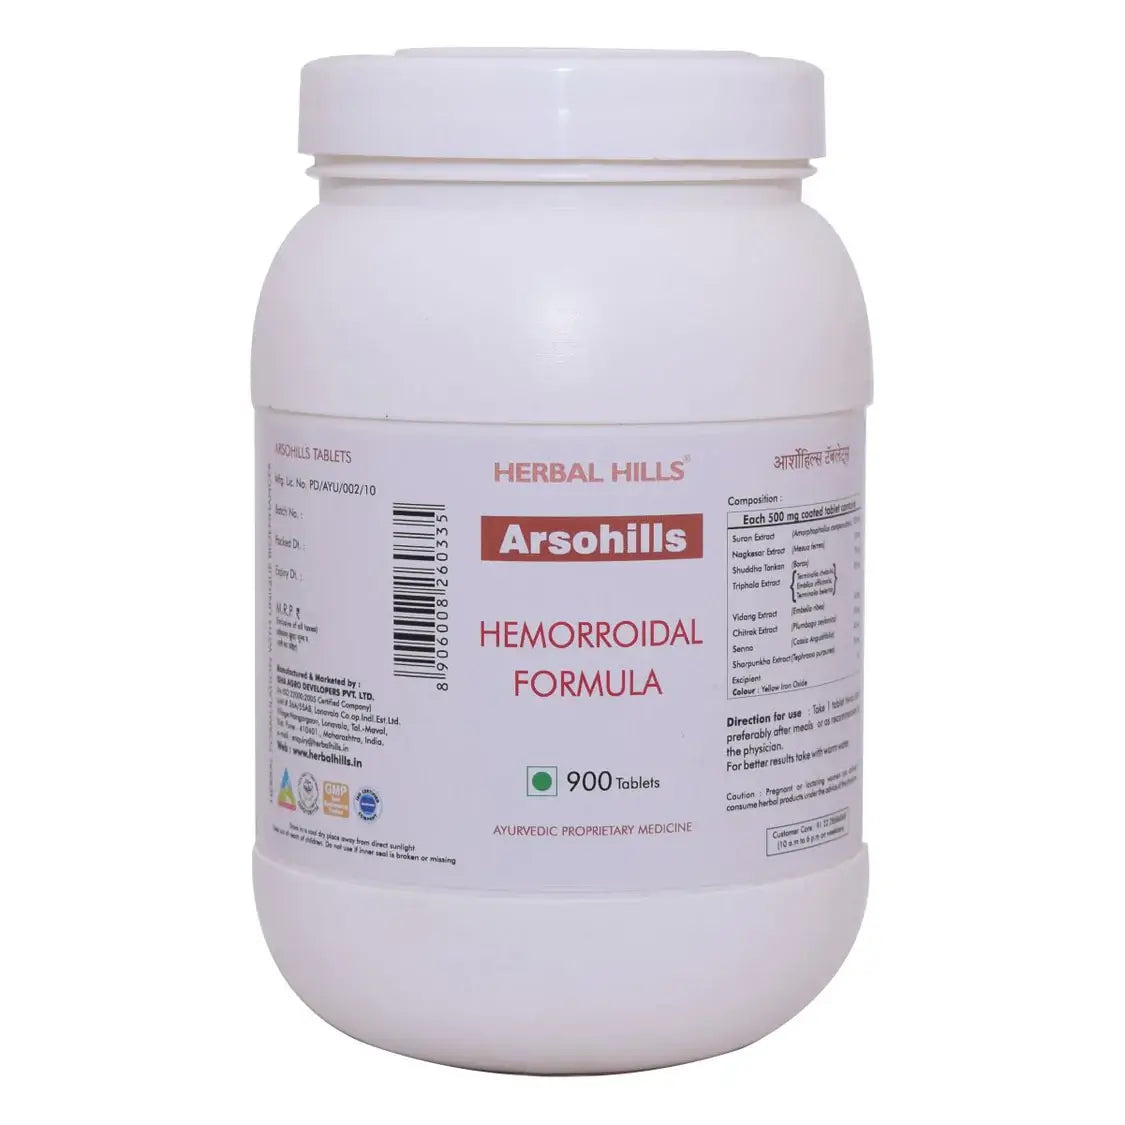 Arsohills Tablet Piles Care Fast Relief from Digestion & Constipation Bavasir Hemorrhoid